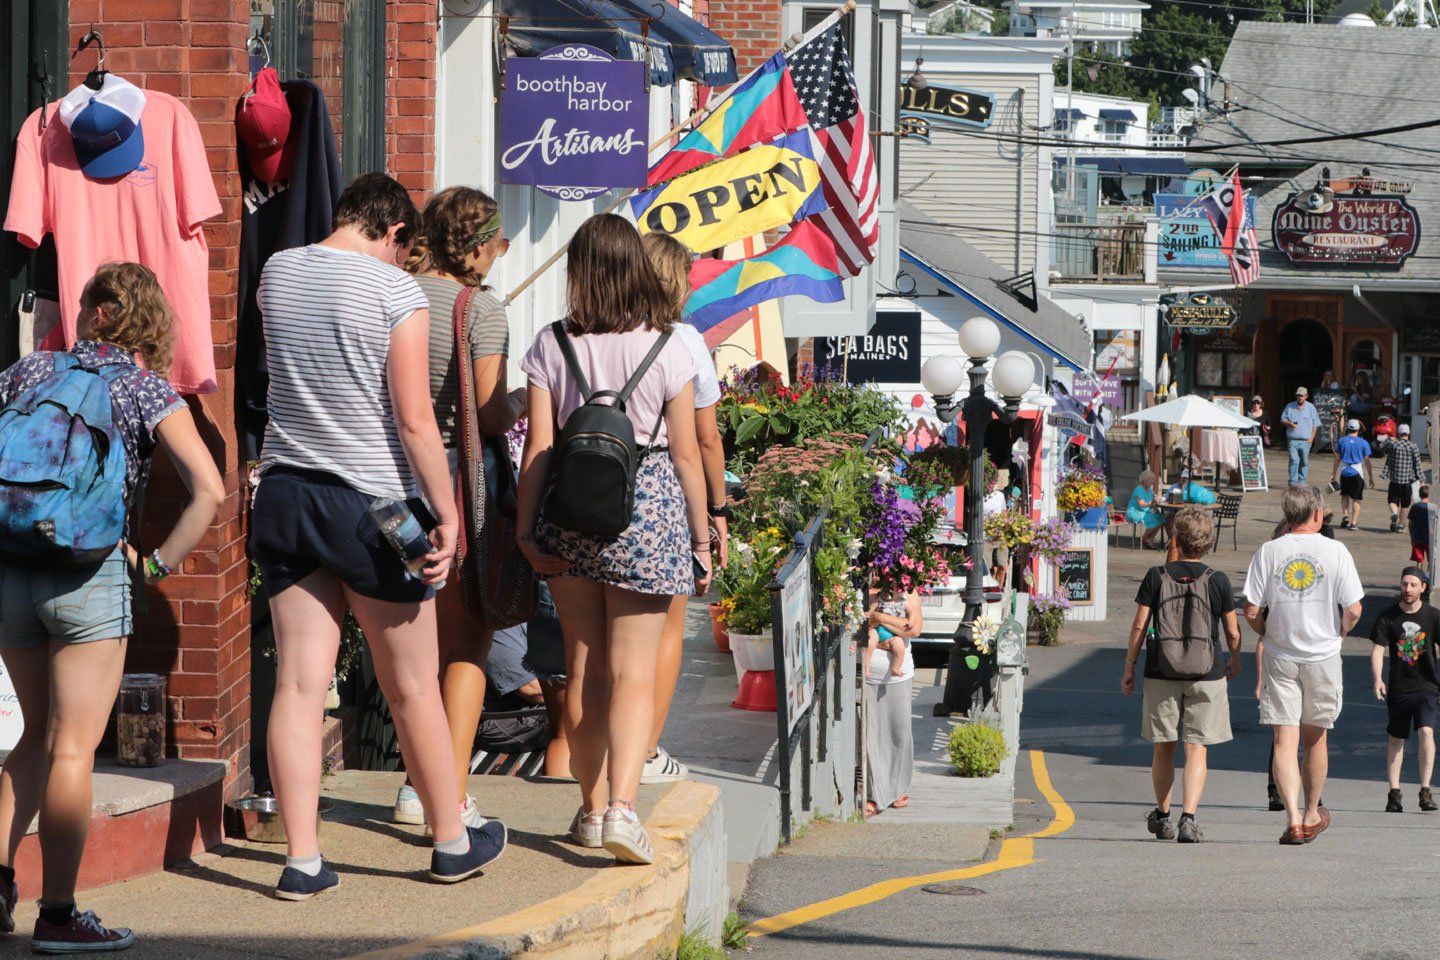 Shopping Boothbay Harbor Maine